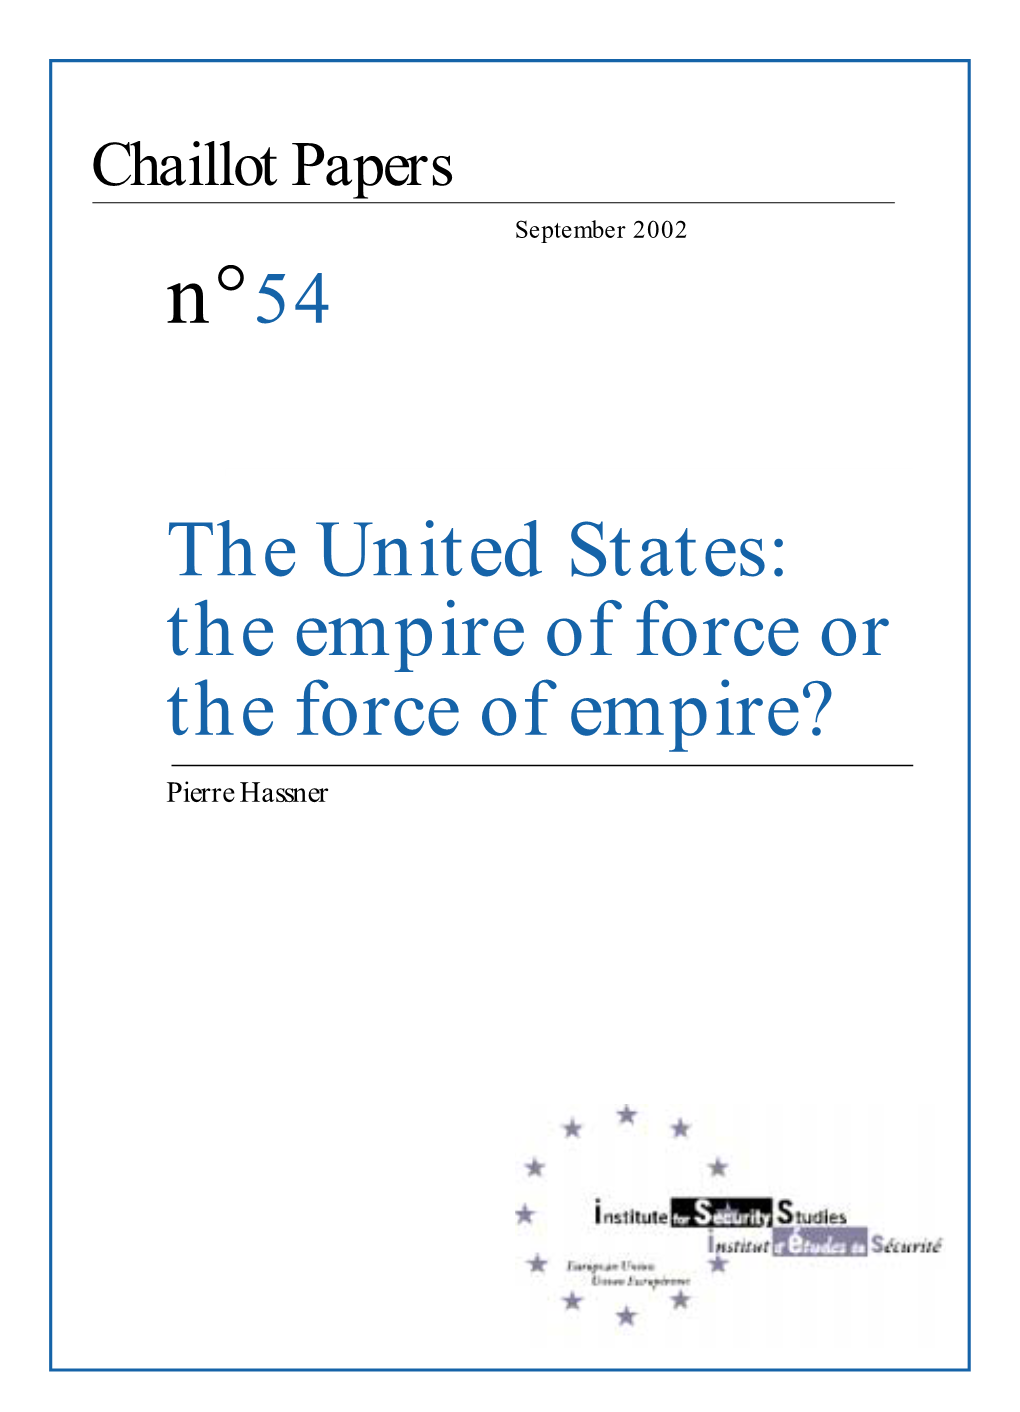 The United States: the Empire of Force Or the Force of Empire?